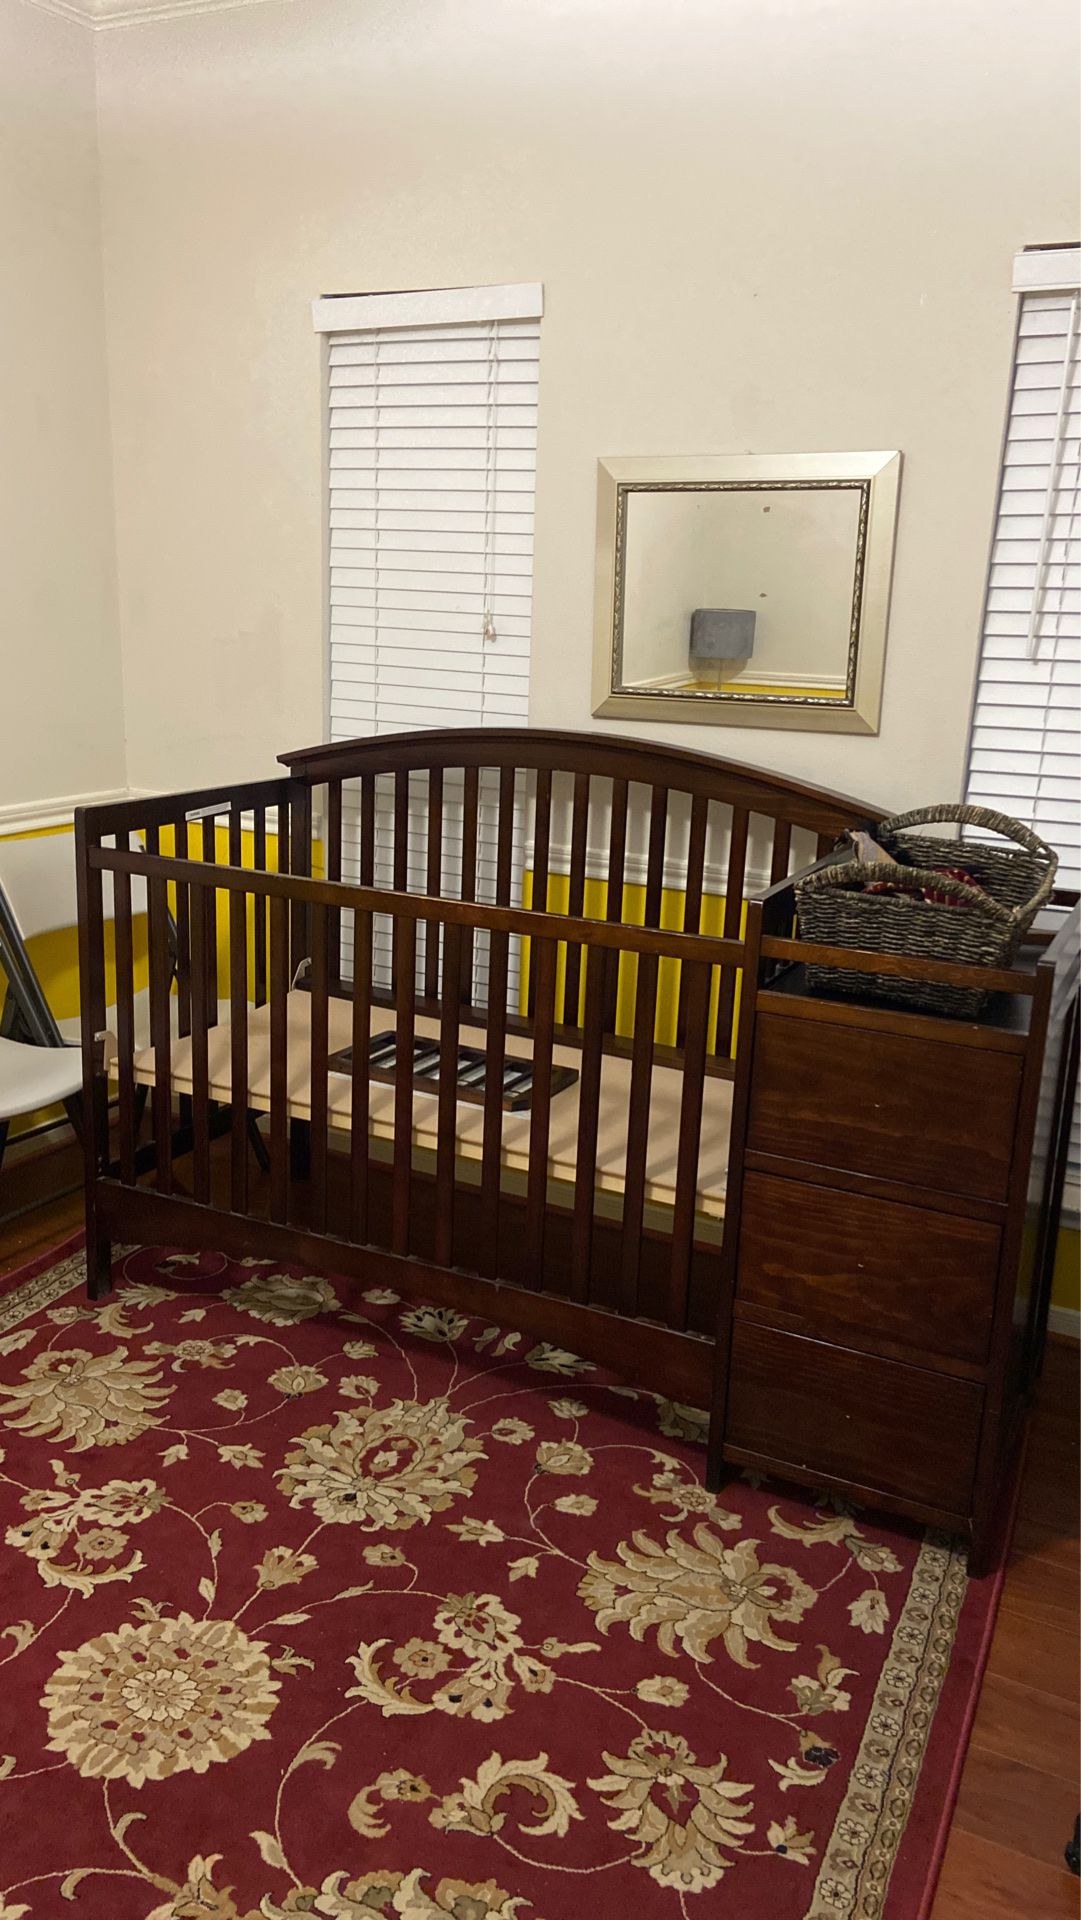 Baby crib with changing table